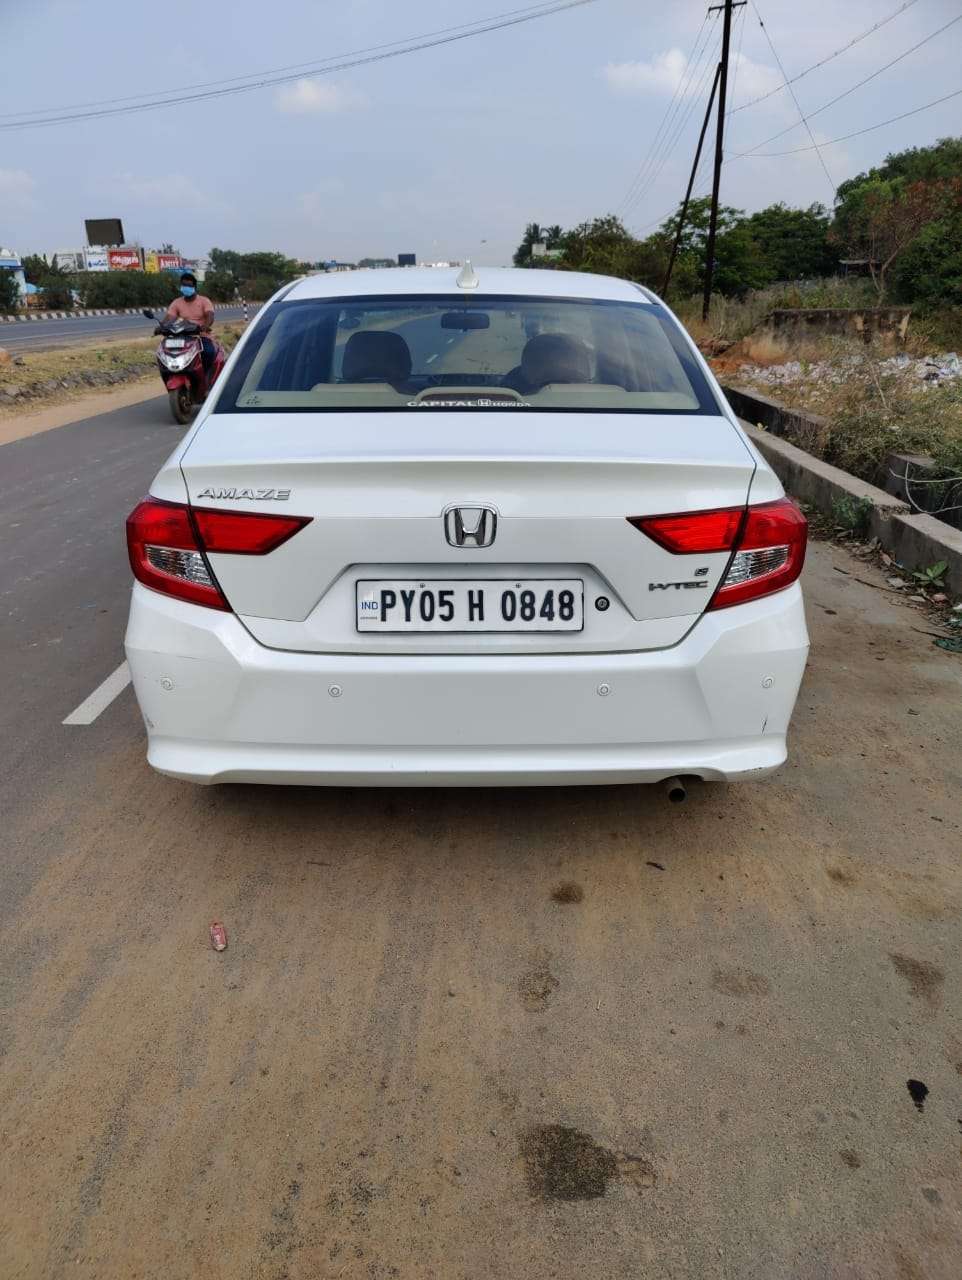 1790-for-sale-Honda-Amaze-Petrol-First-Owner-2019-PY-registered-rs-595000